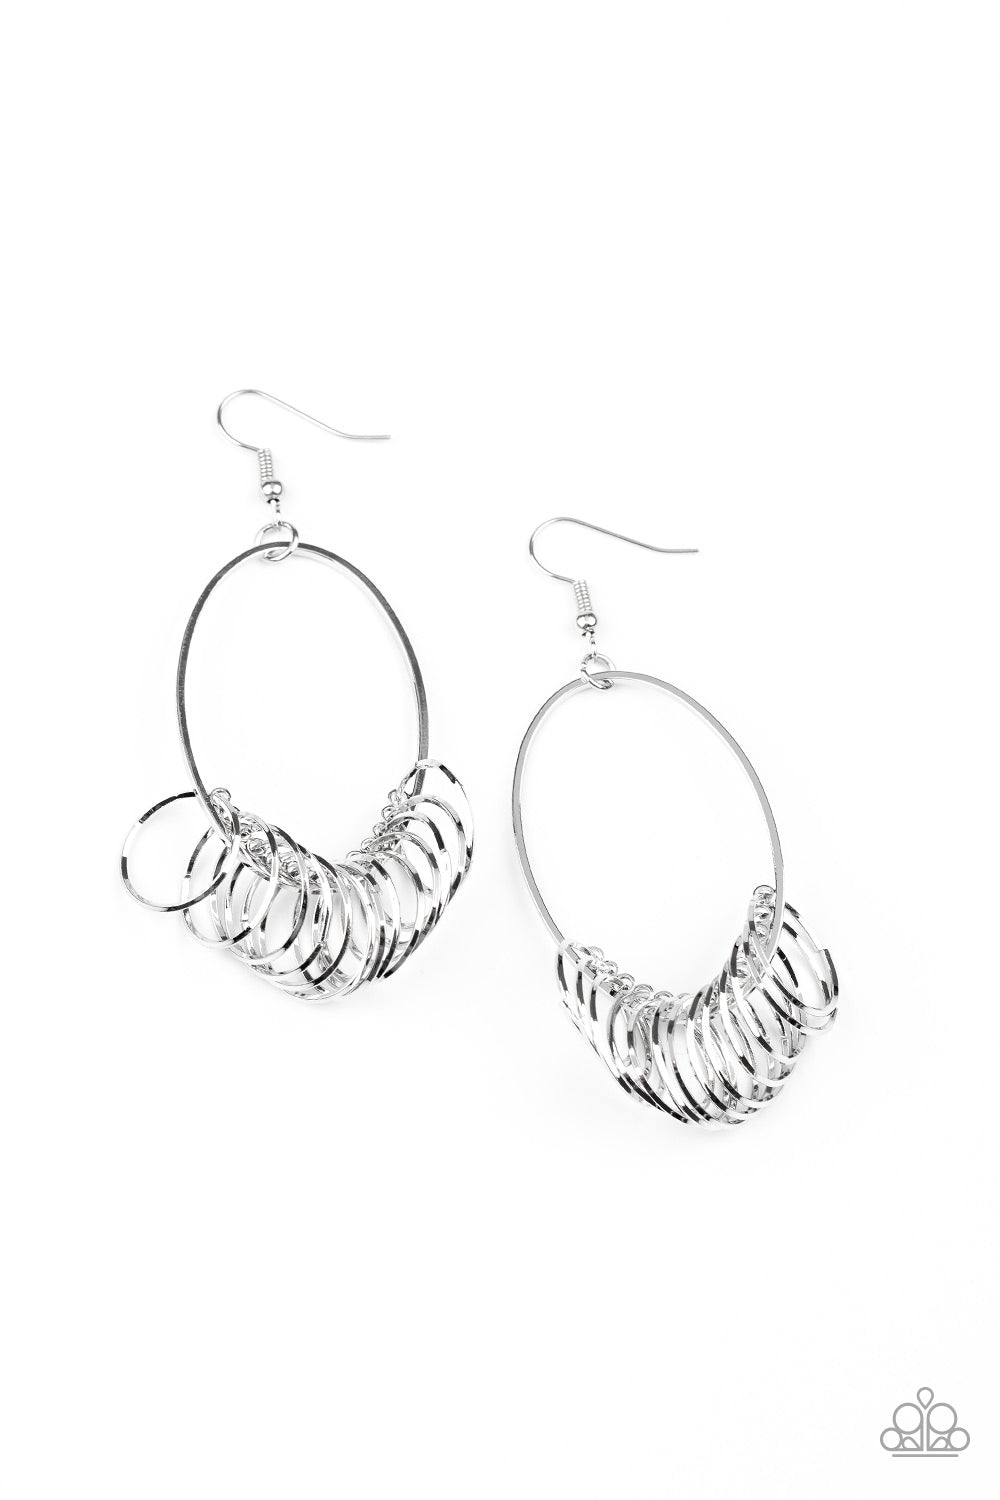 Paparazzi Halo Effect - Silver Earrings - A Finishing Touch 